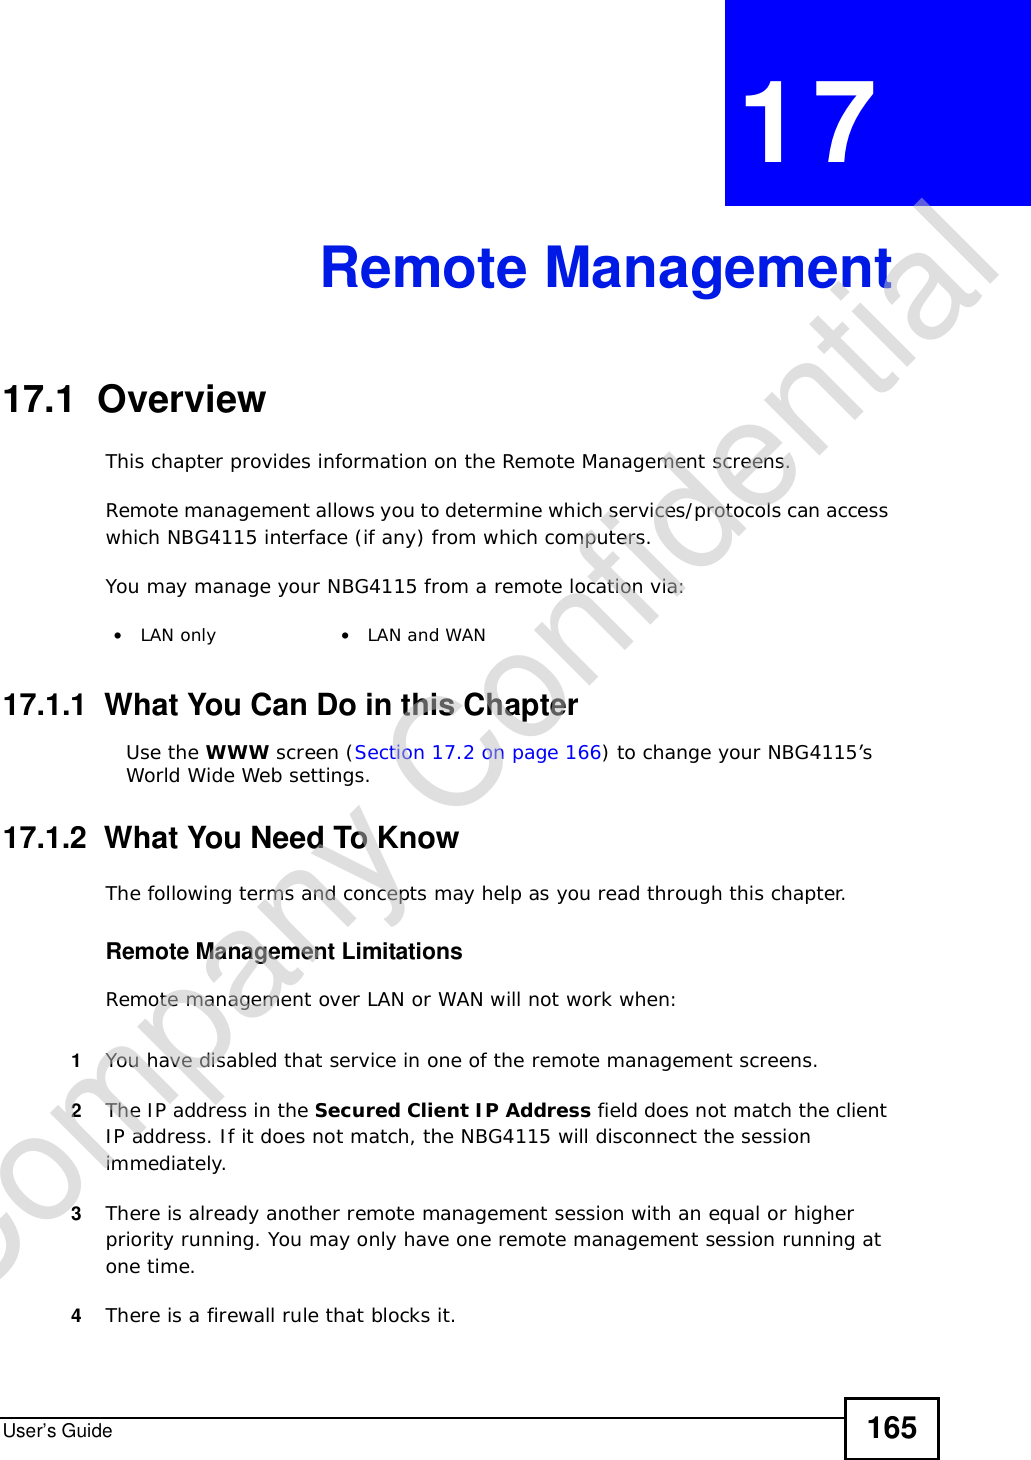 User’s Guide 165CHAPTER 17Remote Management17.1  OverviewThis chapter provides information on the Remote Management screens. Remote management allows you to determine which services/protocols can access which NBG4115 interface (if any) from which computers.You may manage your NBG4115 from a remote location via:17.1.1  What You Can Do in this ChapterUse the WWW screen (Section 17.2 on page 166) to change your NBG4115’s World Wide Web settings.17.1.2  What You Need To KnowThe following terms and concepts may help as you read through this chapter.Remote Management LimitationsRemote management over LAN or WAN will not work when:1You have disabled that service in one of the remote management screens.2The IP address in the Secured Client IP Address field does not match the client IP address. If it does not match, the NBG4115 will disconnect the session immediately.3There is already another remote management session with an equal or higher priority running. You may only have one remote management session running at one time.4There is a firewall rule that blocks it.•LAN only •LAN and WANCompany Confidential